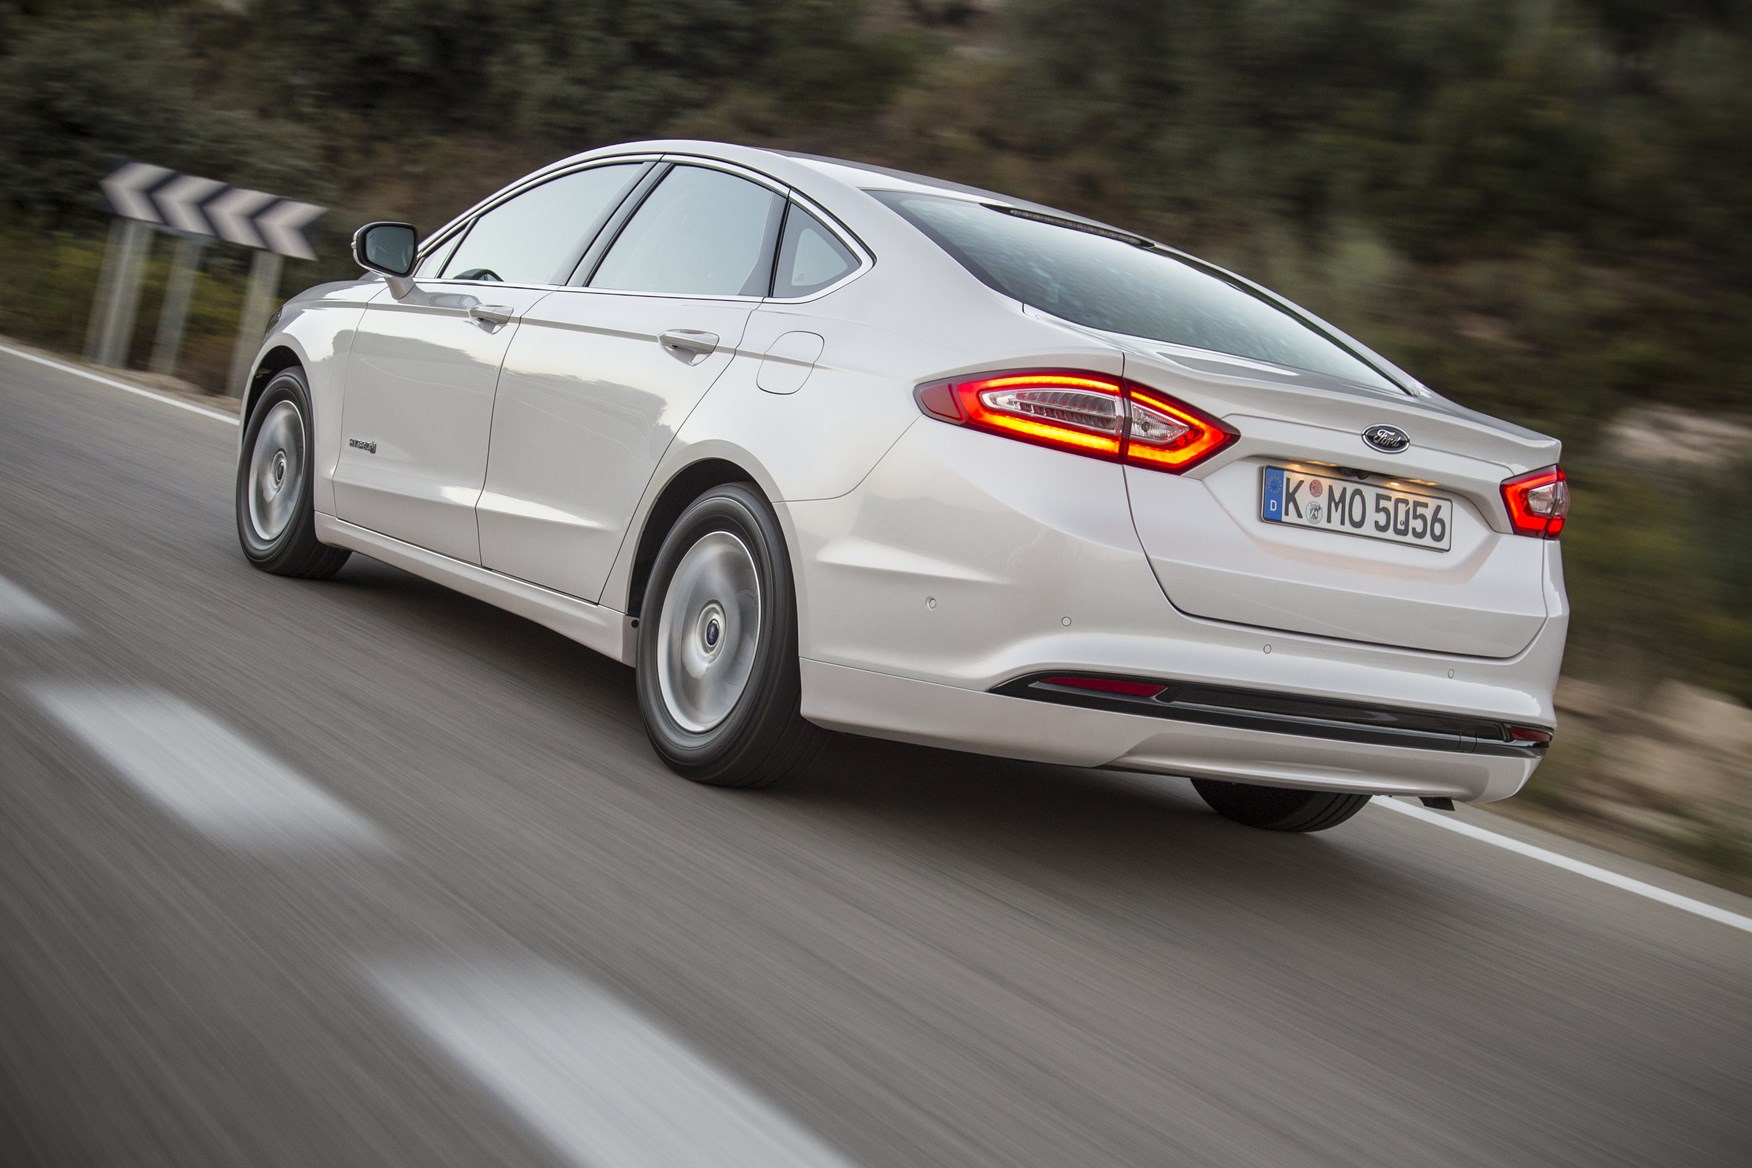 Ford Mondeo Saloon Review (2014 - ) | Parkers